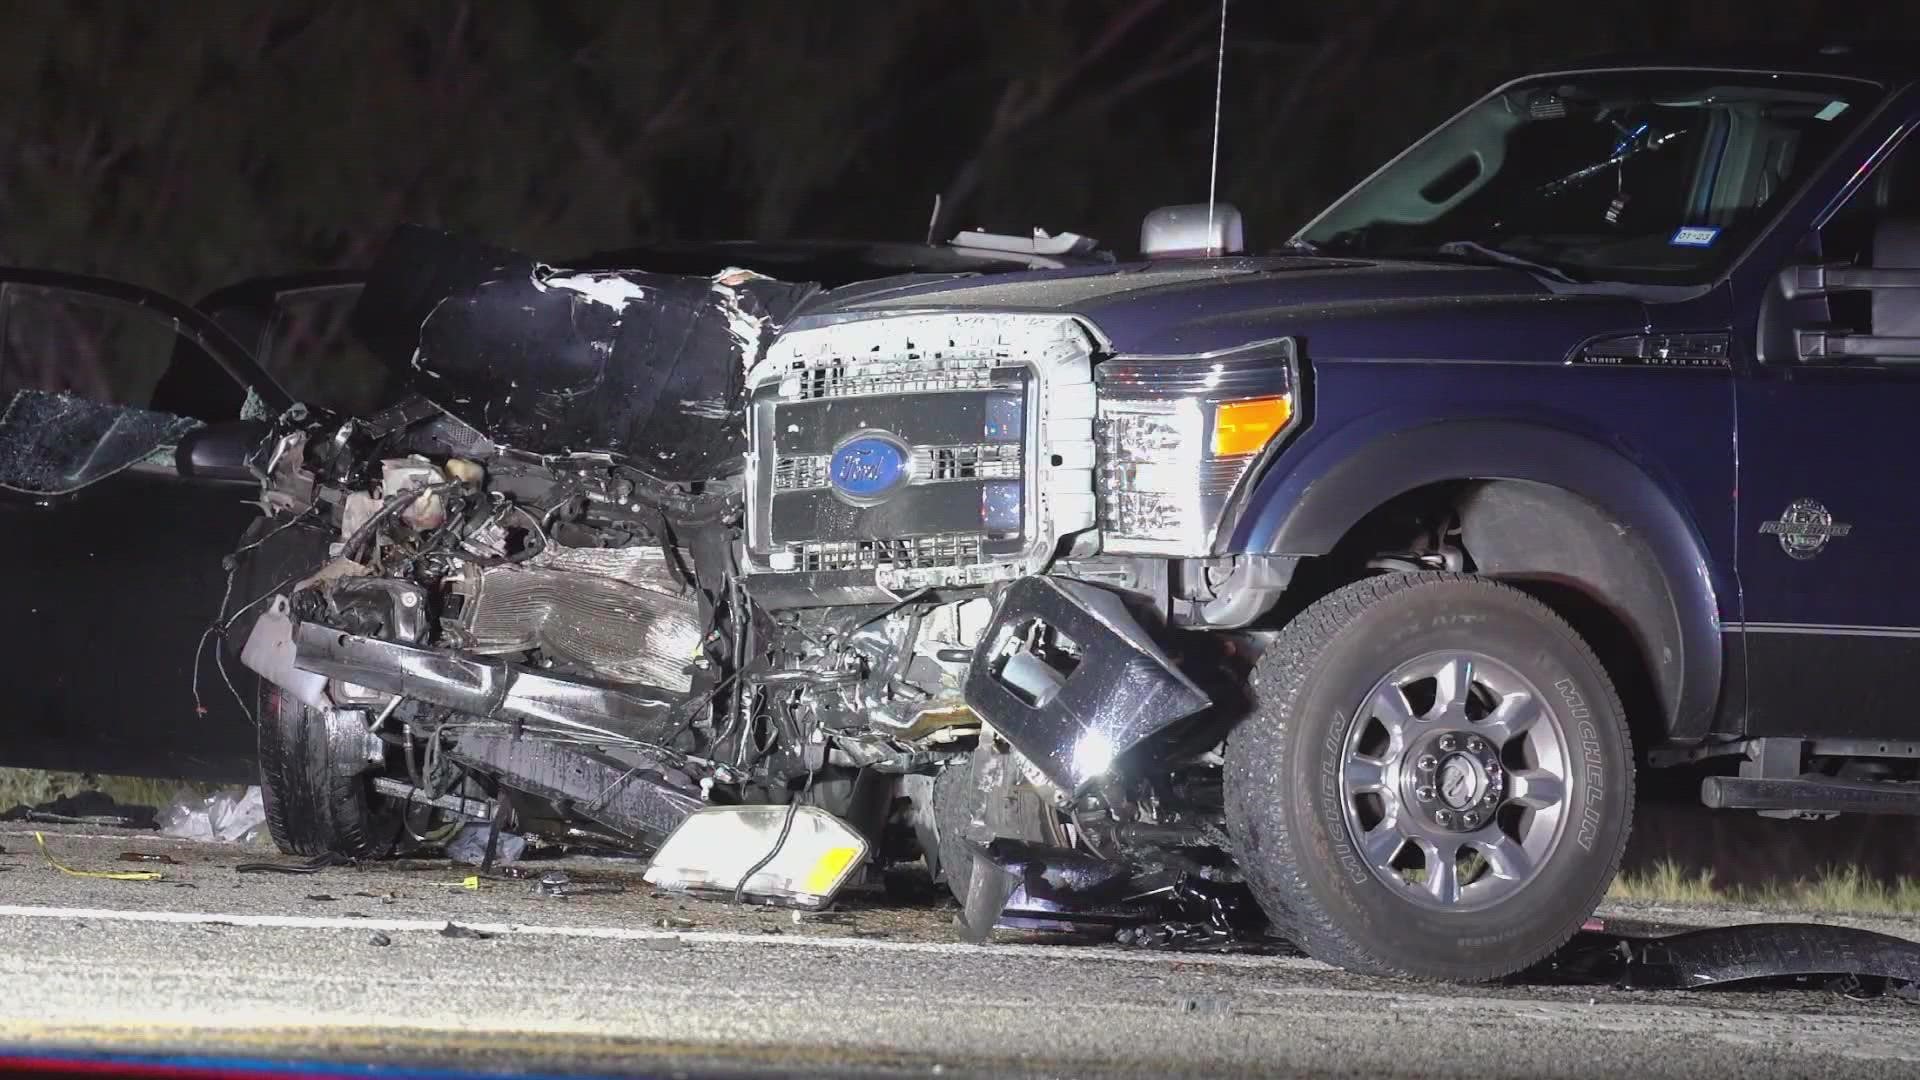 First wreck happened last night when an off-duty Bexar County Sheriff's Deputy was involved in a head-on collision.